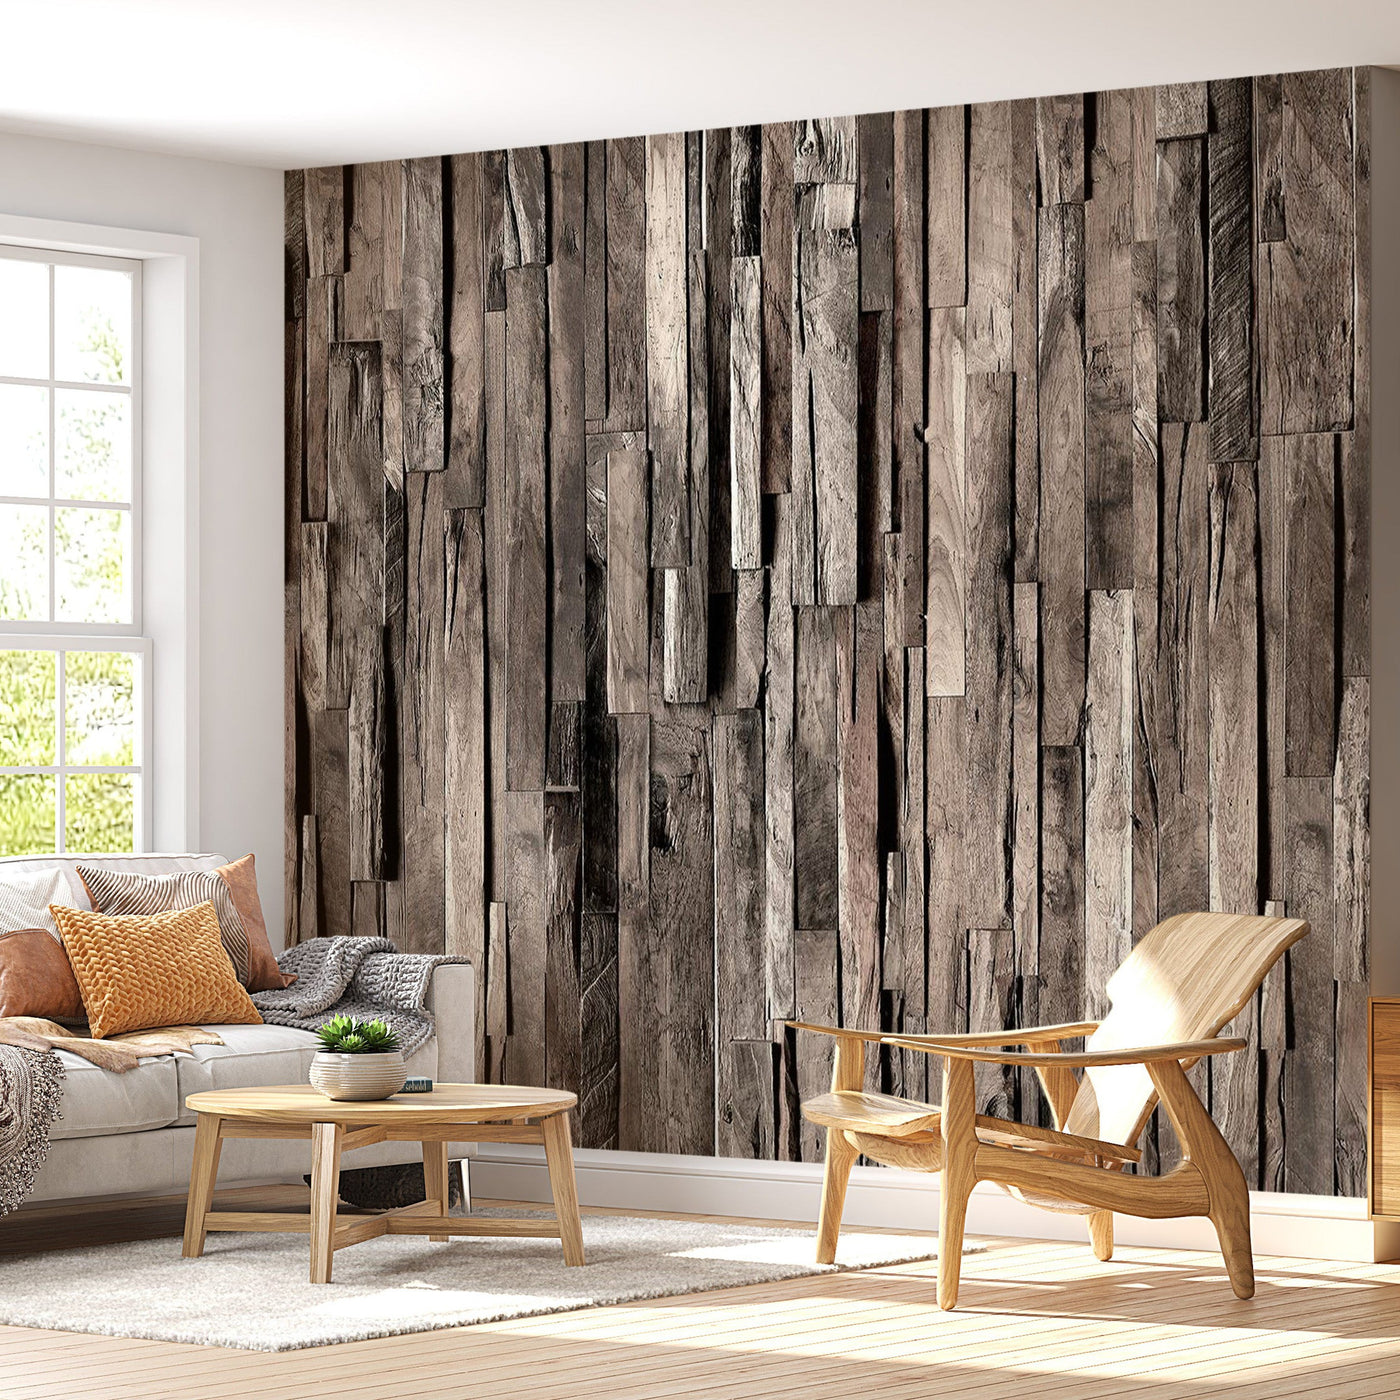 Peel & Stick Wall Mural - Vertical Weathered Wooden Planks - Removable Wall Decals